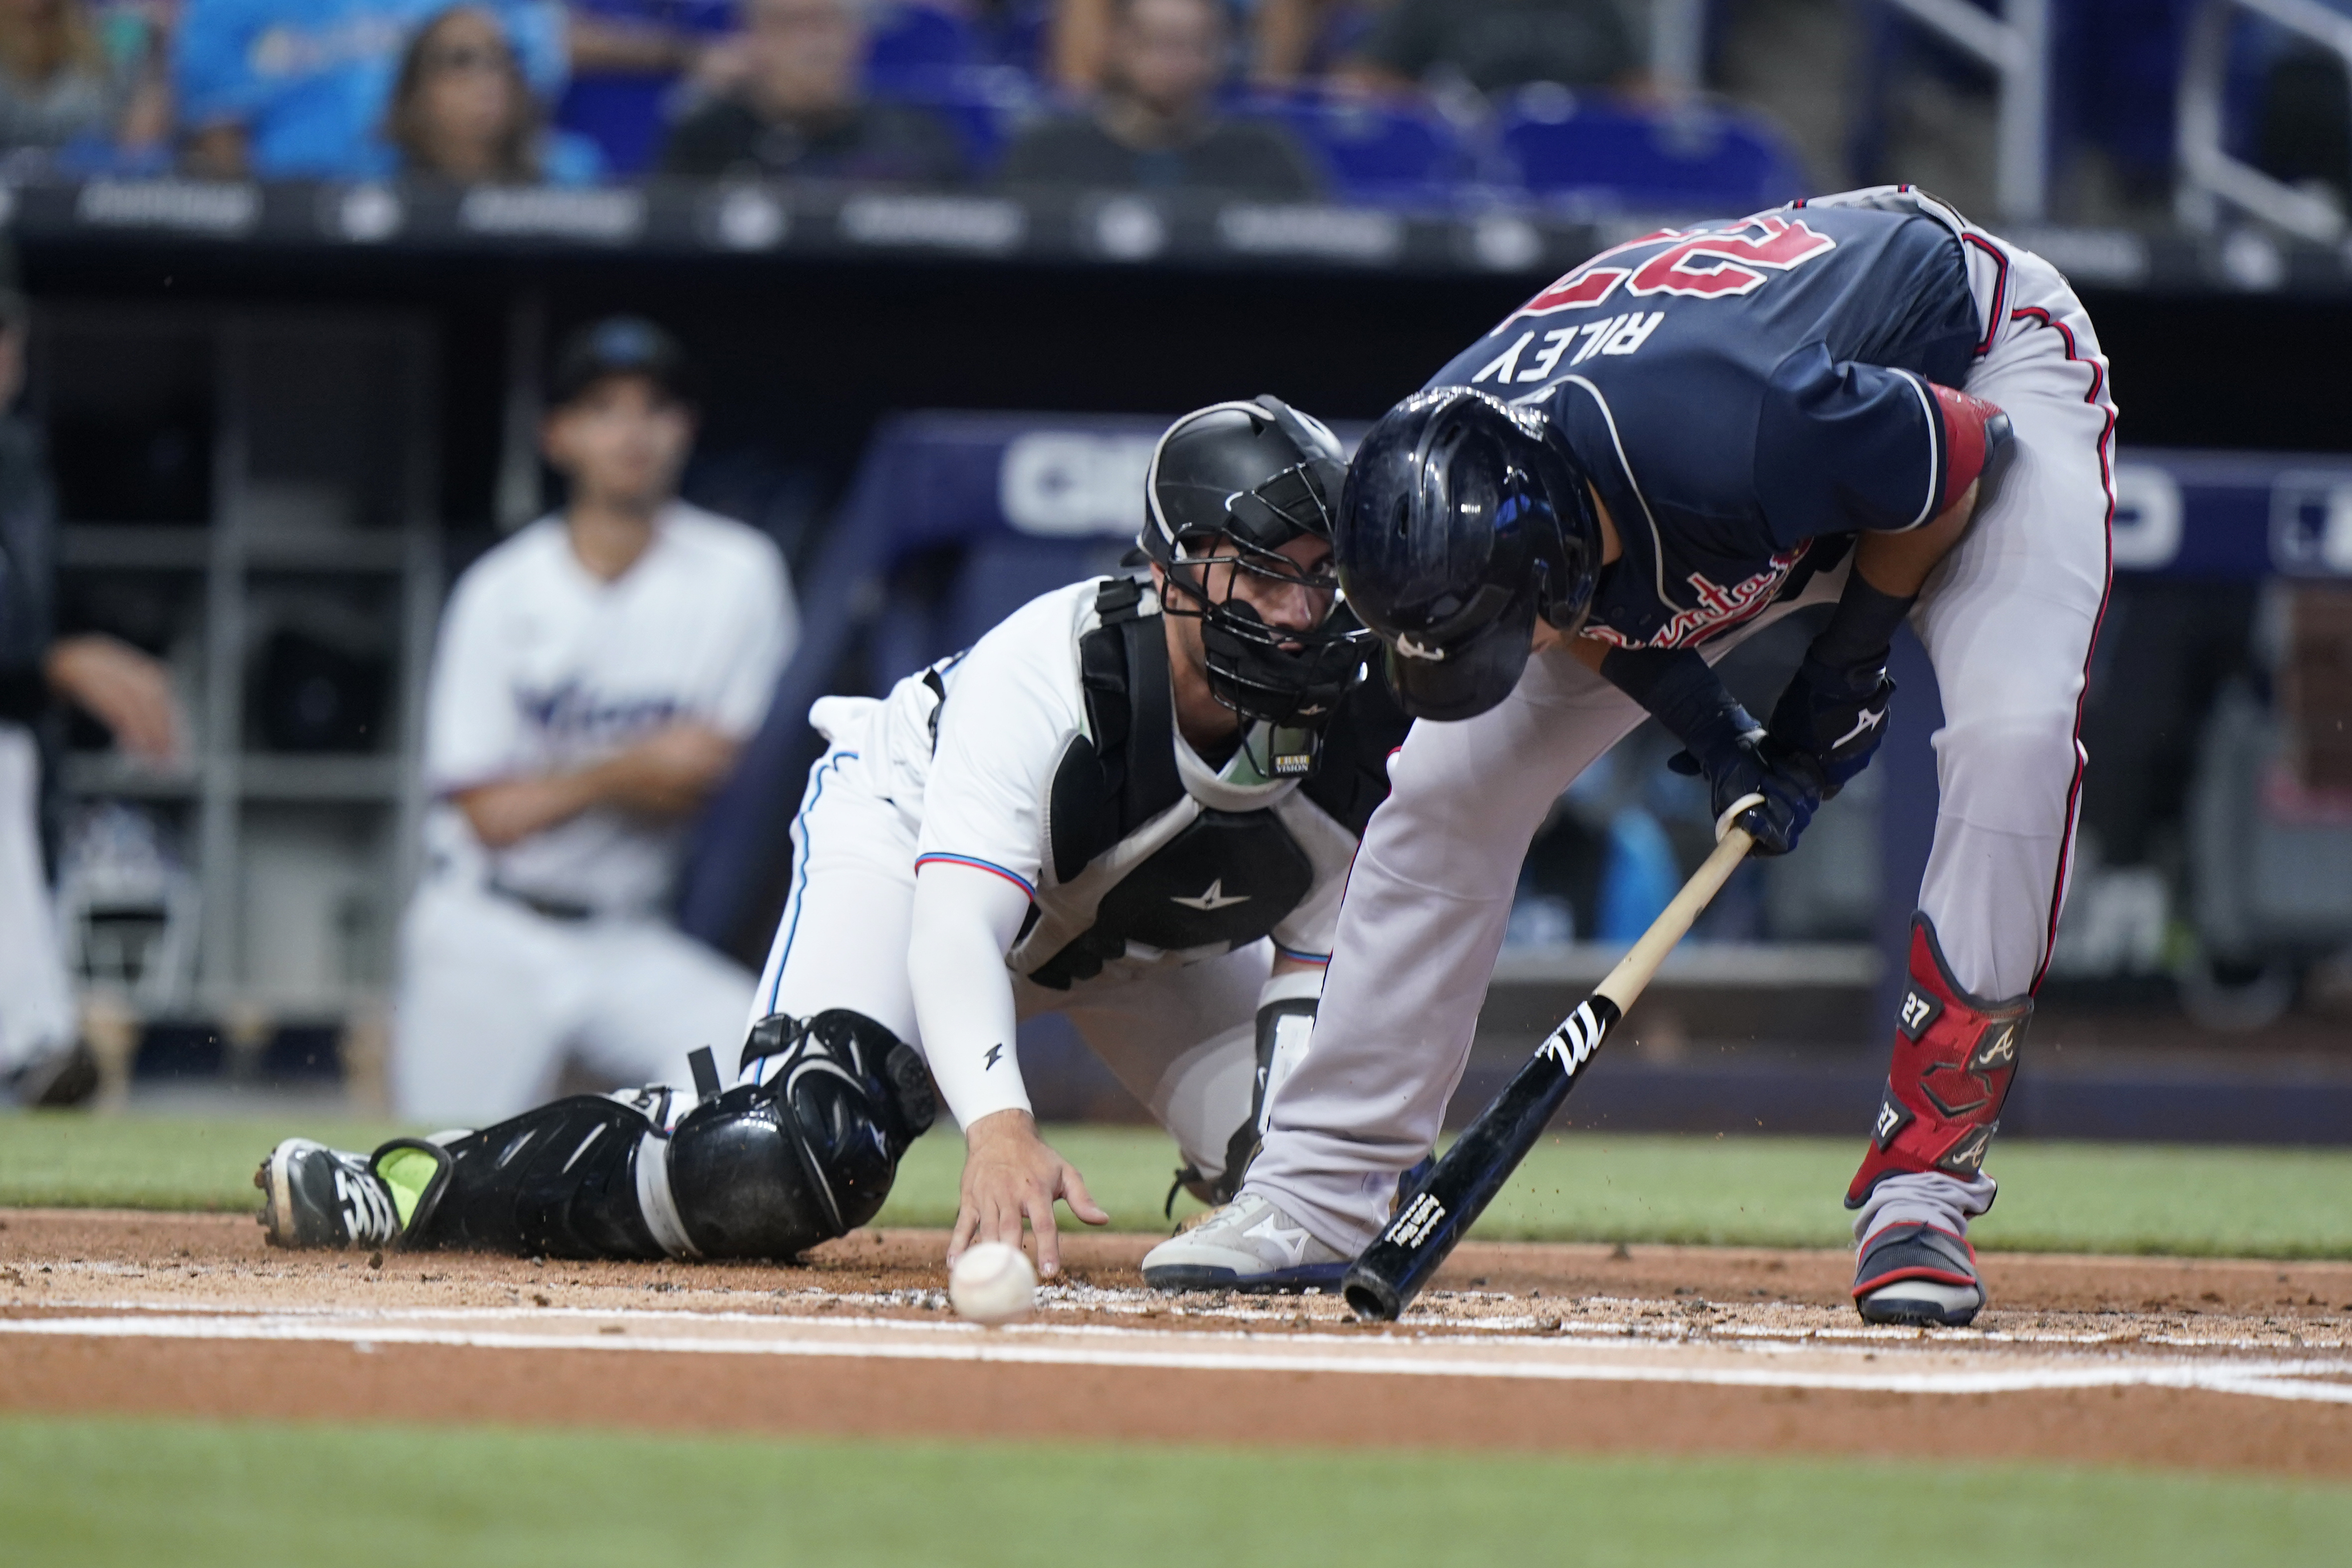 Atlanta Braves offered Dansby Swanson a deal worth around $100 million